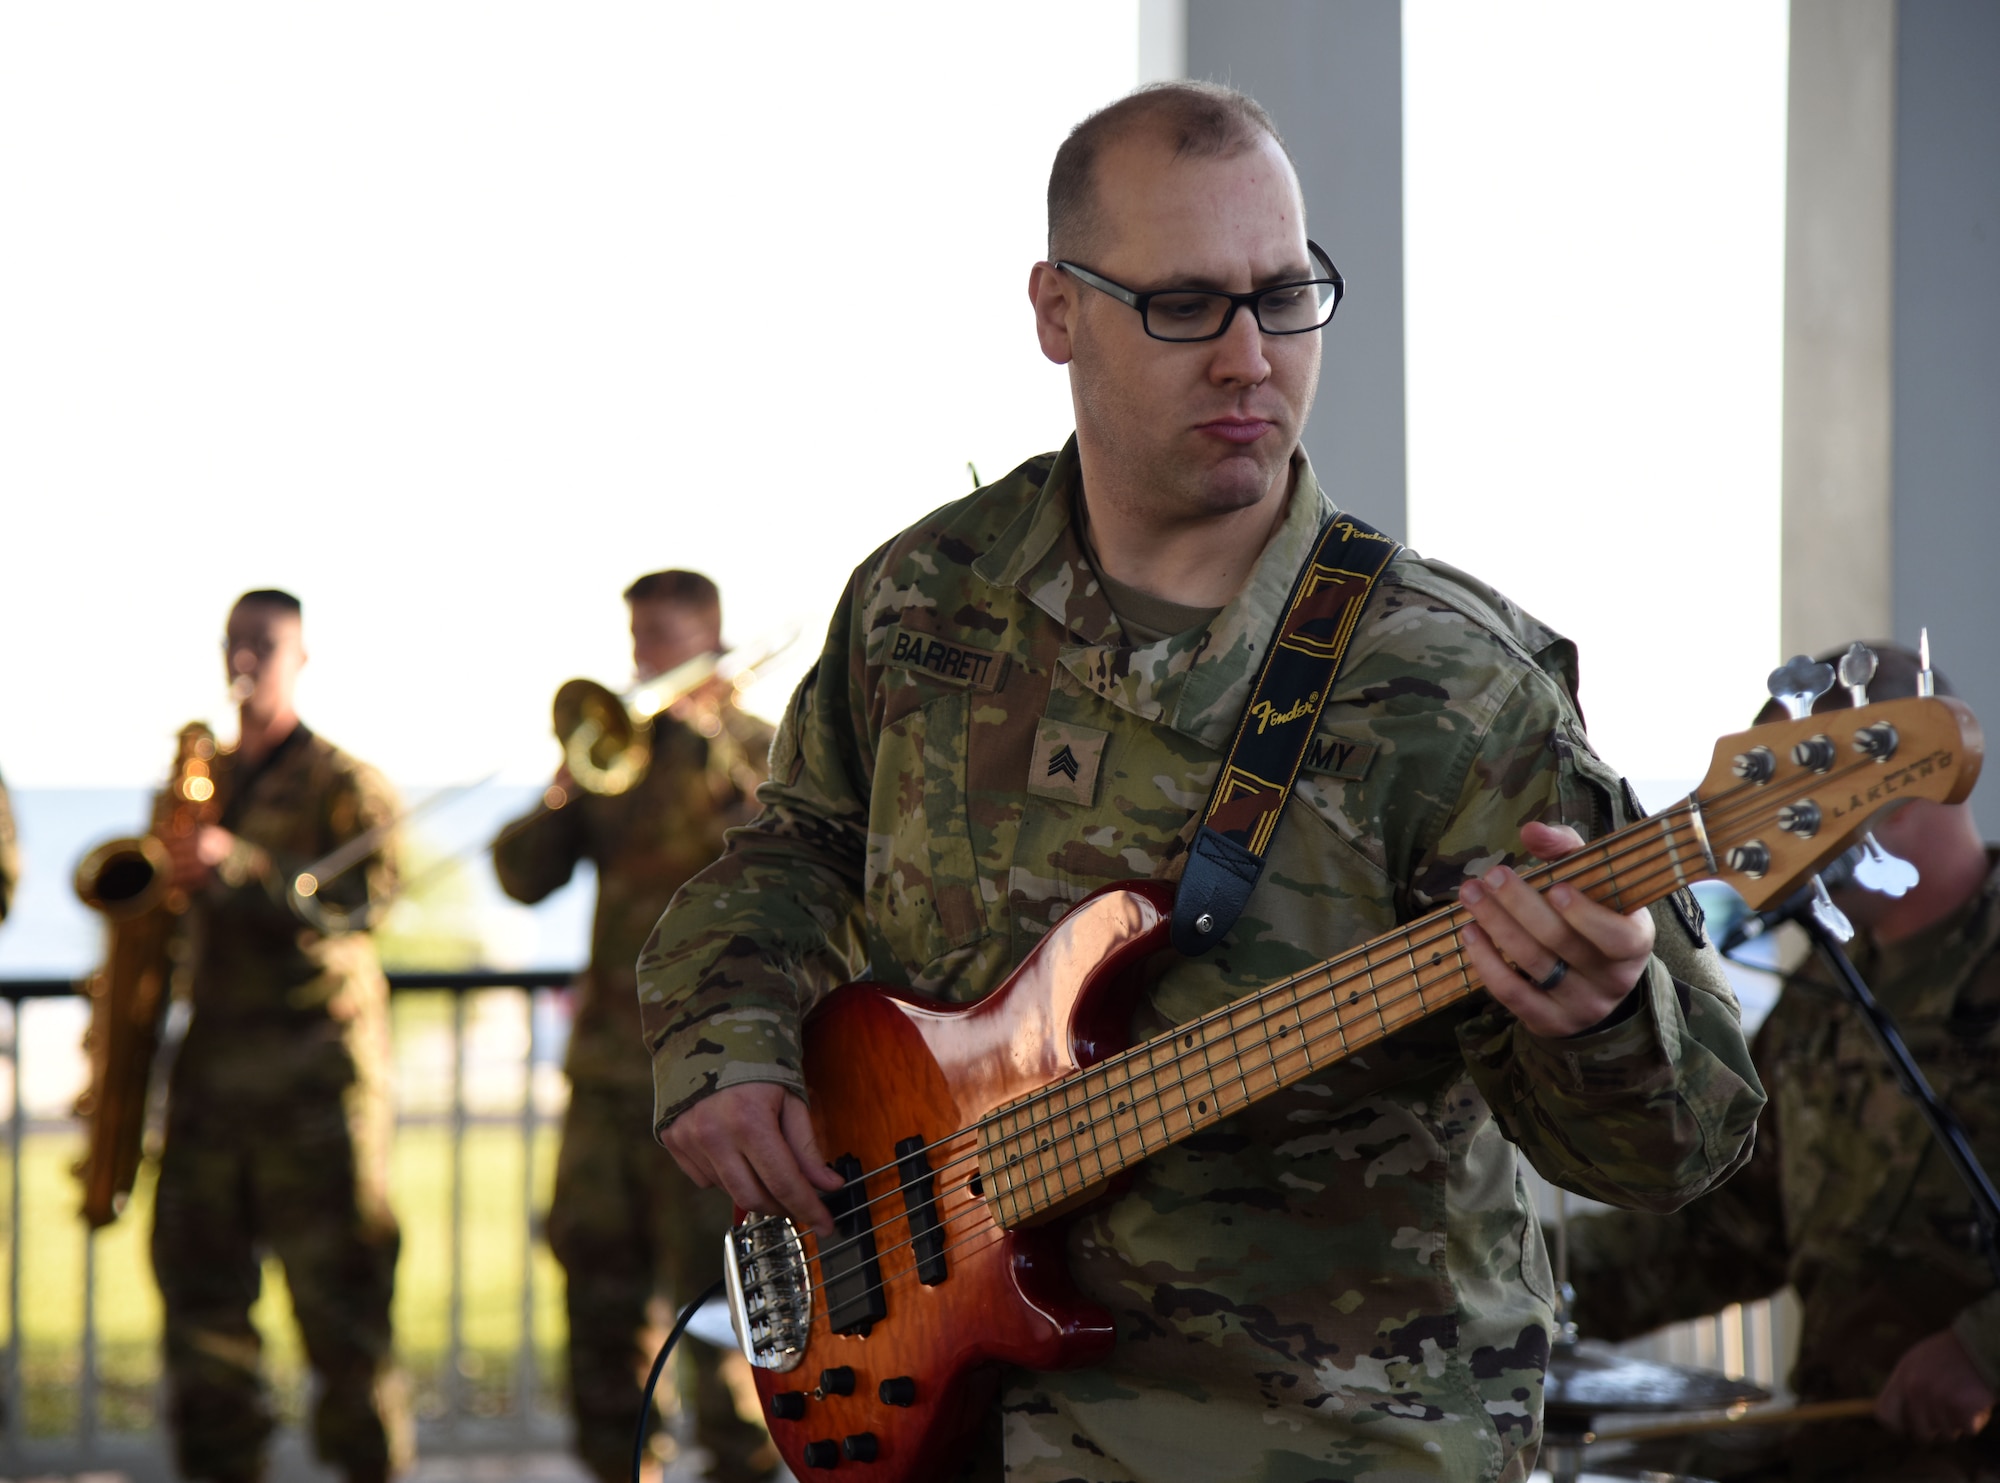 U.S. Army Sergeant Joseph Barrett, U.S. Army 41st Army Band bass guitarist and musical ambassador, Mississippi Air National Guard, Jackson, Mississippi, performs at the Biloxi Lighthouse Park Pavilion March 13, 2018, in Biloxi, Mississippi. The band has been providing musical support and entertainment for over 50 years. They also performed at the White House Hotel, in Biloxi, Mississippi, and at the Vandenberg Commons on Keesler Air Force Base, Mississippi. (U.S. Air Force photo by Kemberly Groue)